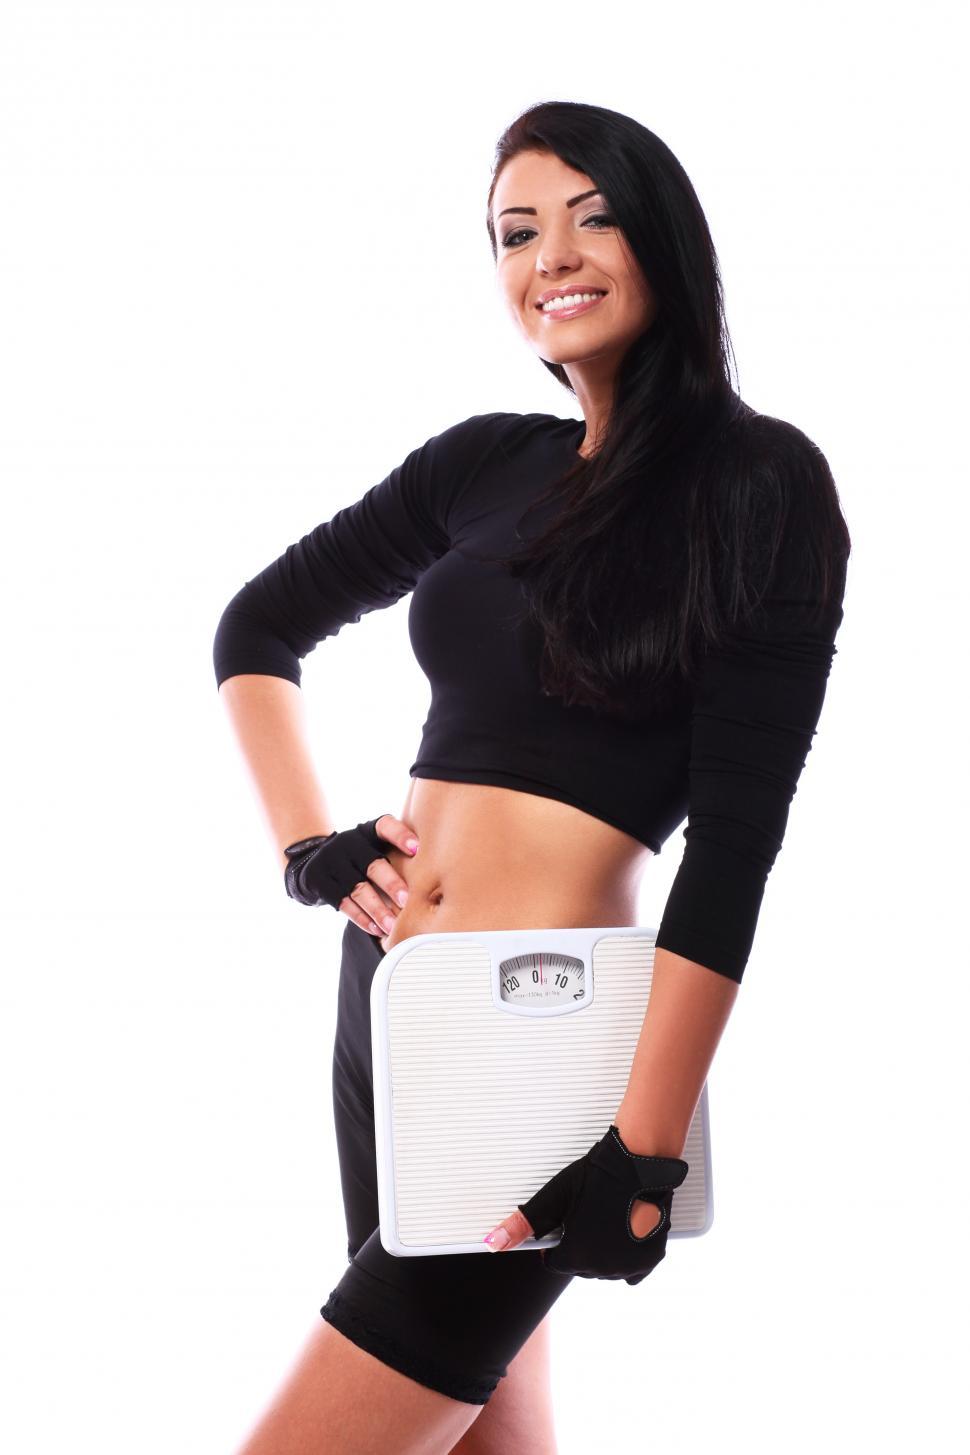 Free Image of Happy fitness girl holding a scale 